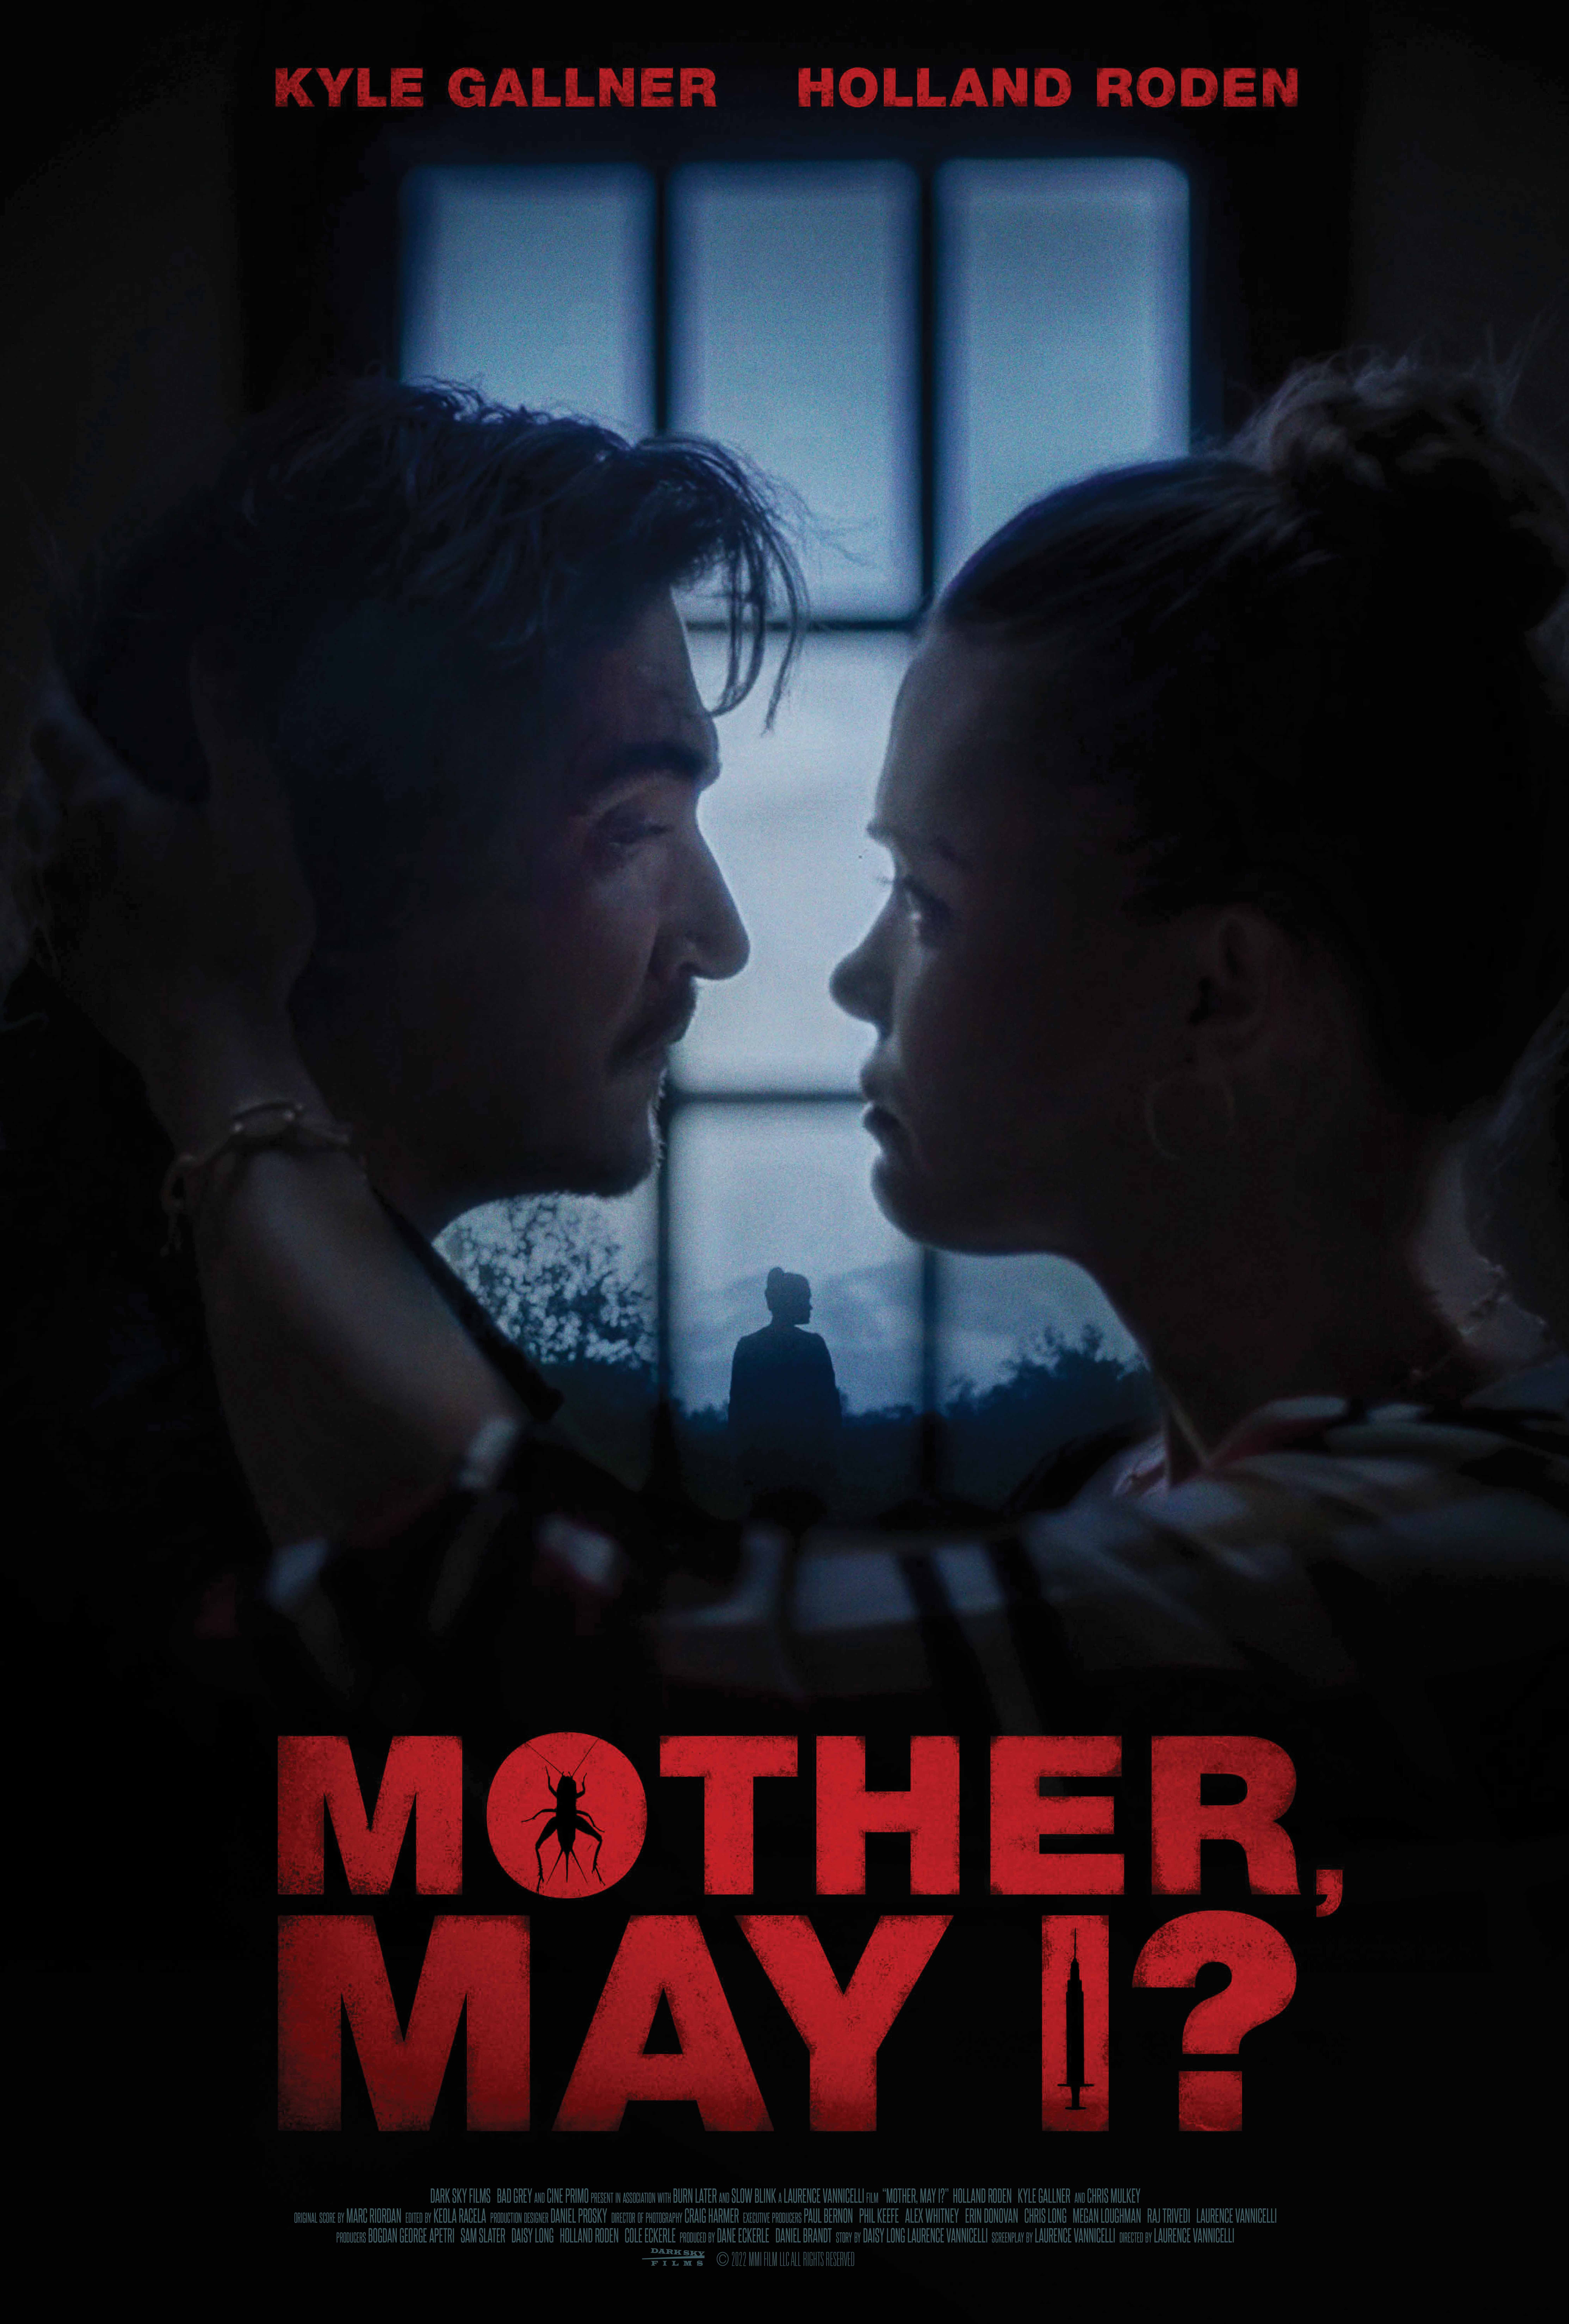 "Mother, May I?" - A Riveting Psychological Thriller Featuring Kyle Gallner and Holland Roden Set to Hit Theaters and VOD on July 21st 29